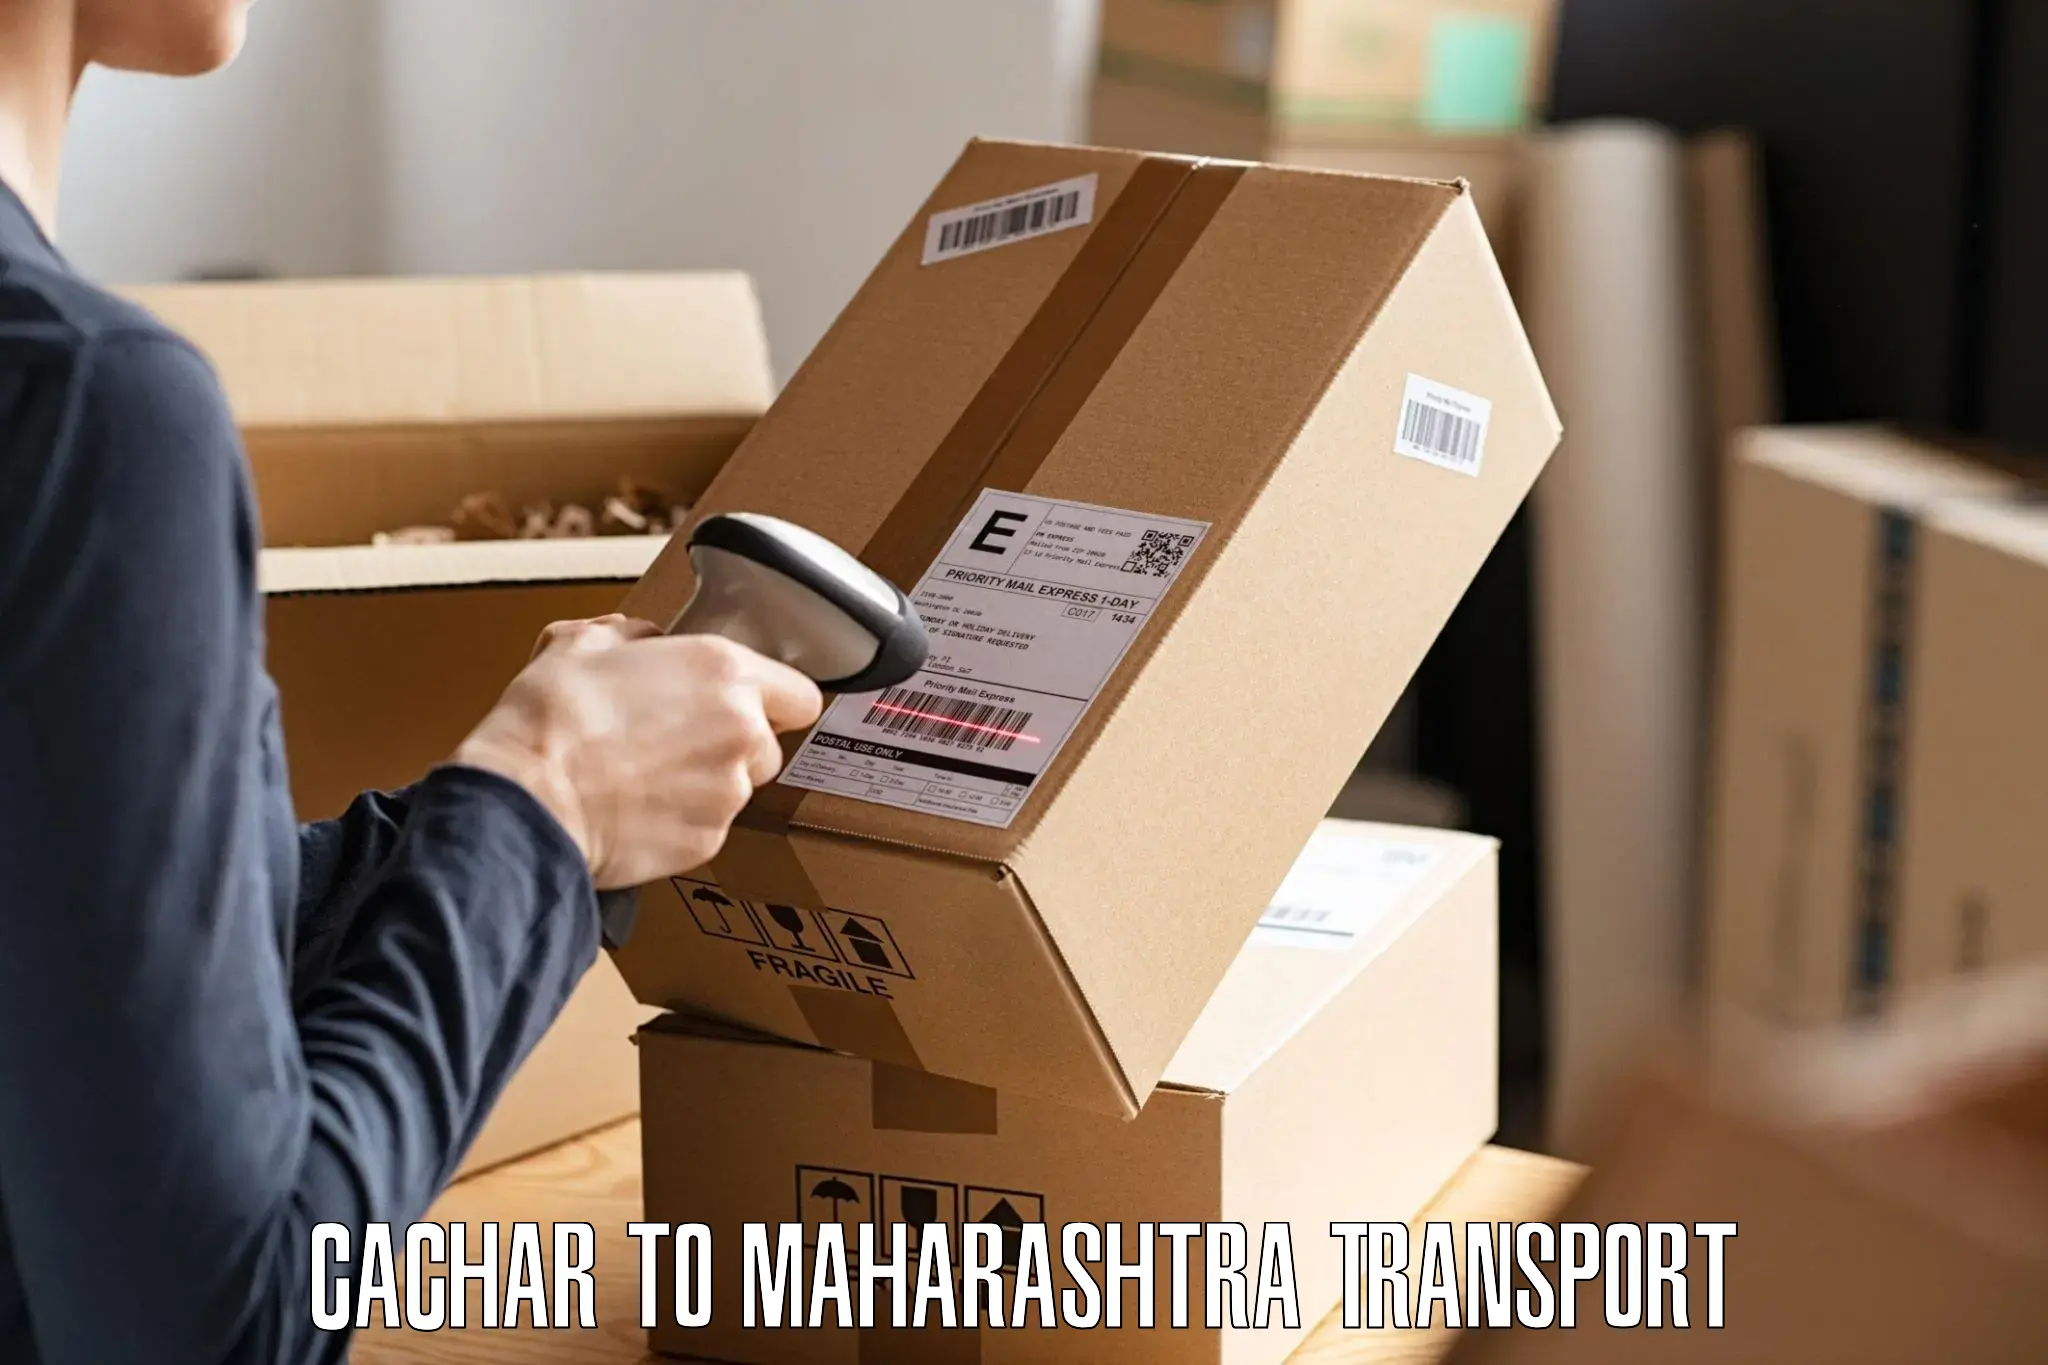 Nationwide transport services Cachar to Nira